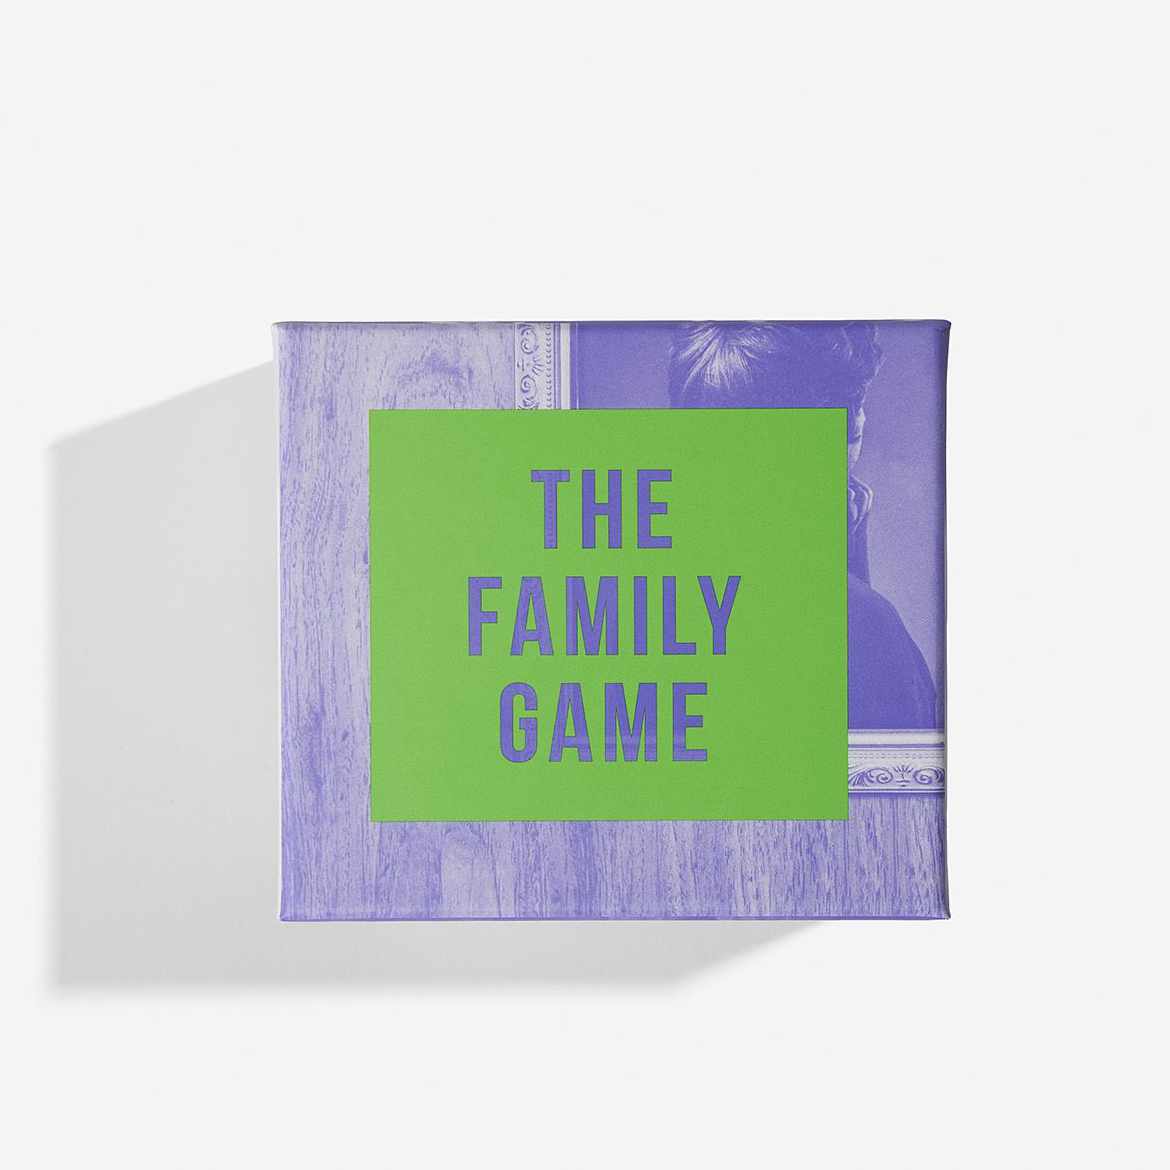 THE FAMILY GAME | English Edition | The School of Life